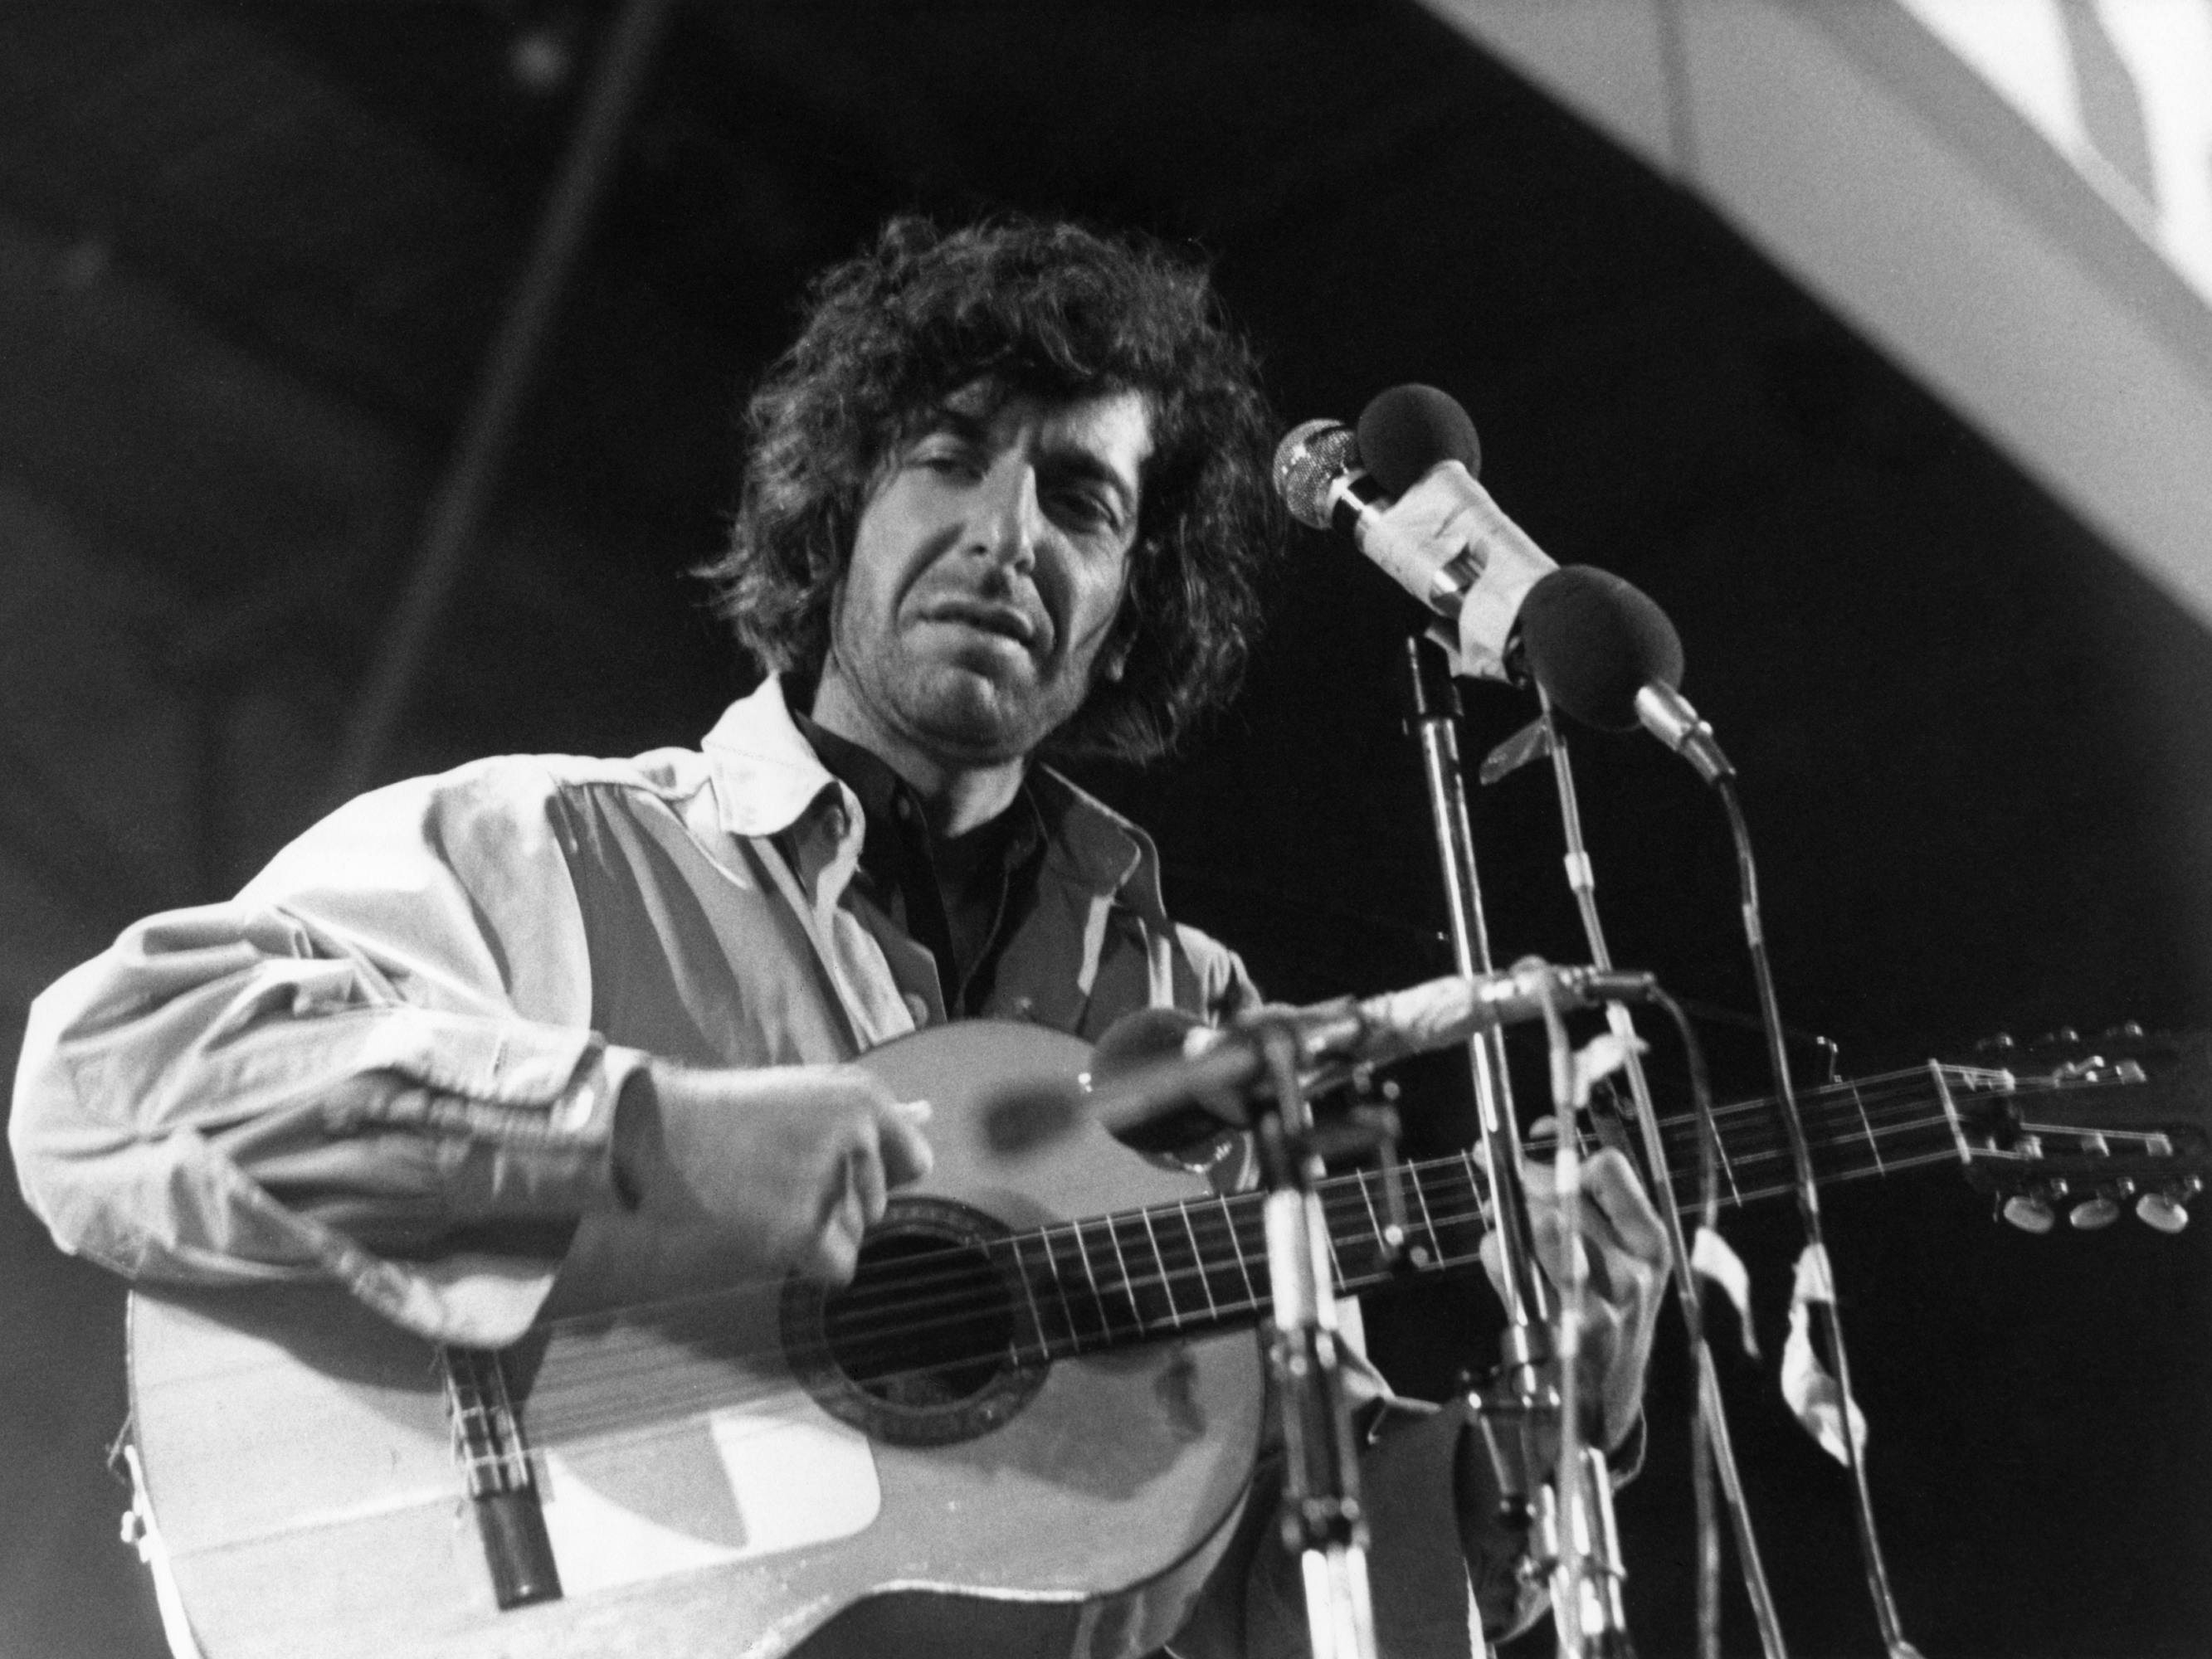 Leonard Cohen plays the guitar and looks angsty.